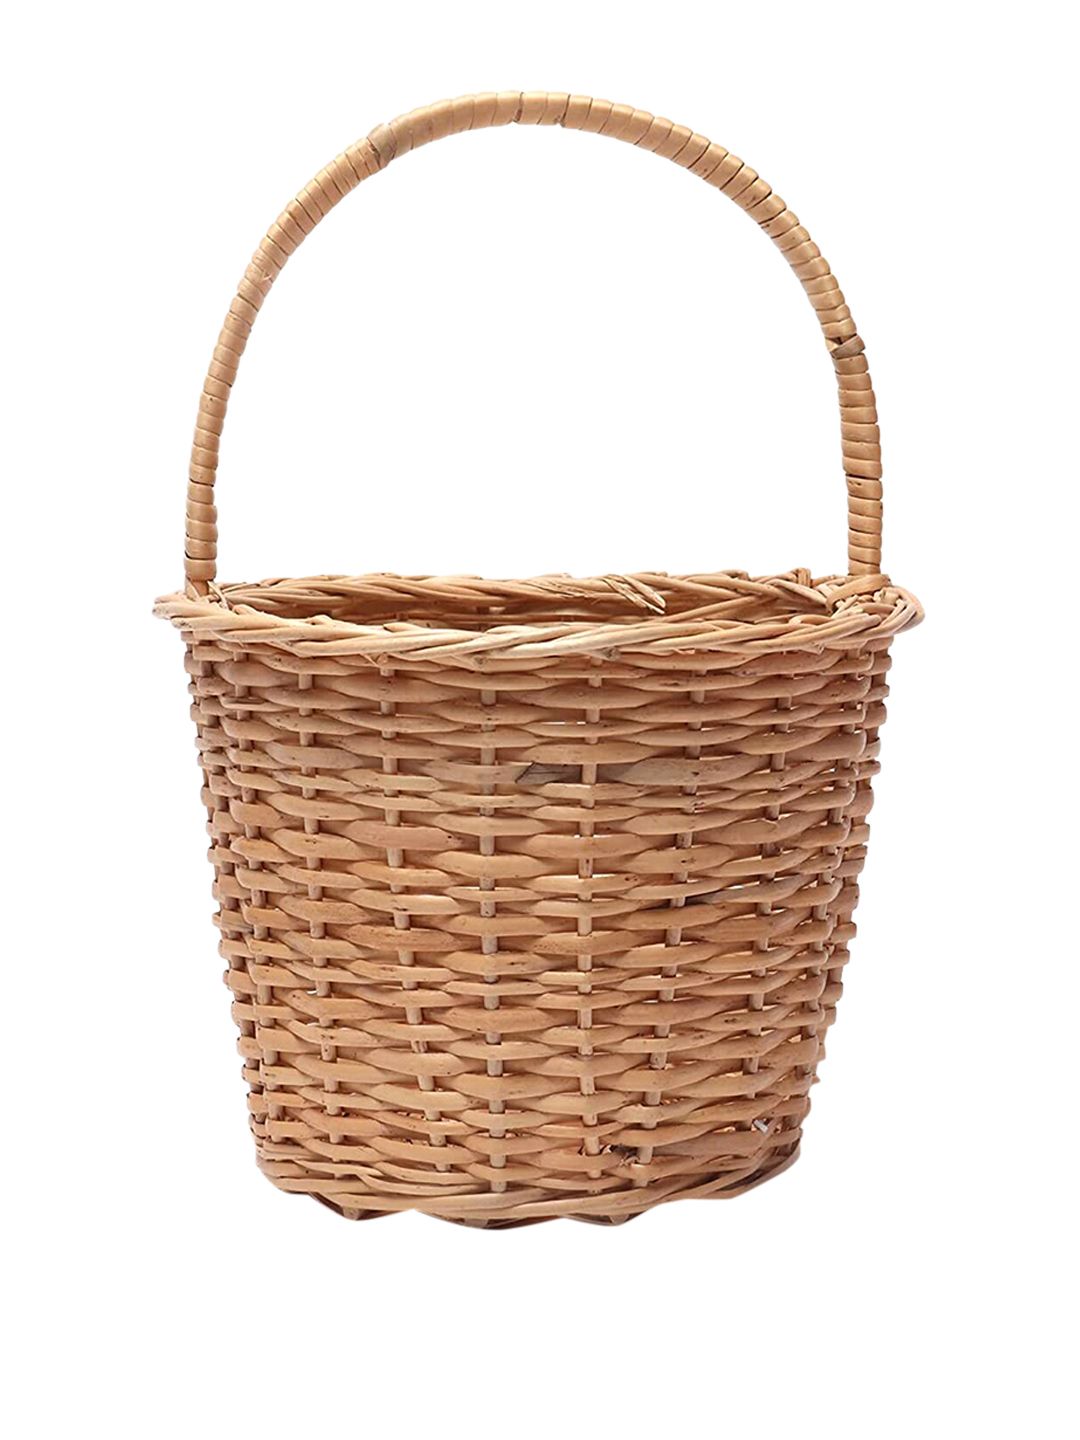 HABERE INDIA Brown Solid Handcrafted Wicker Bucket Basket Price in India